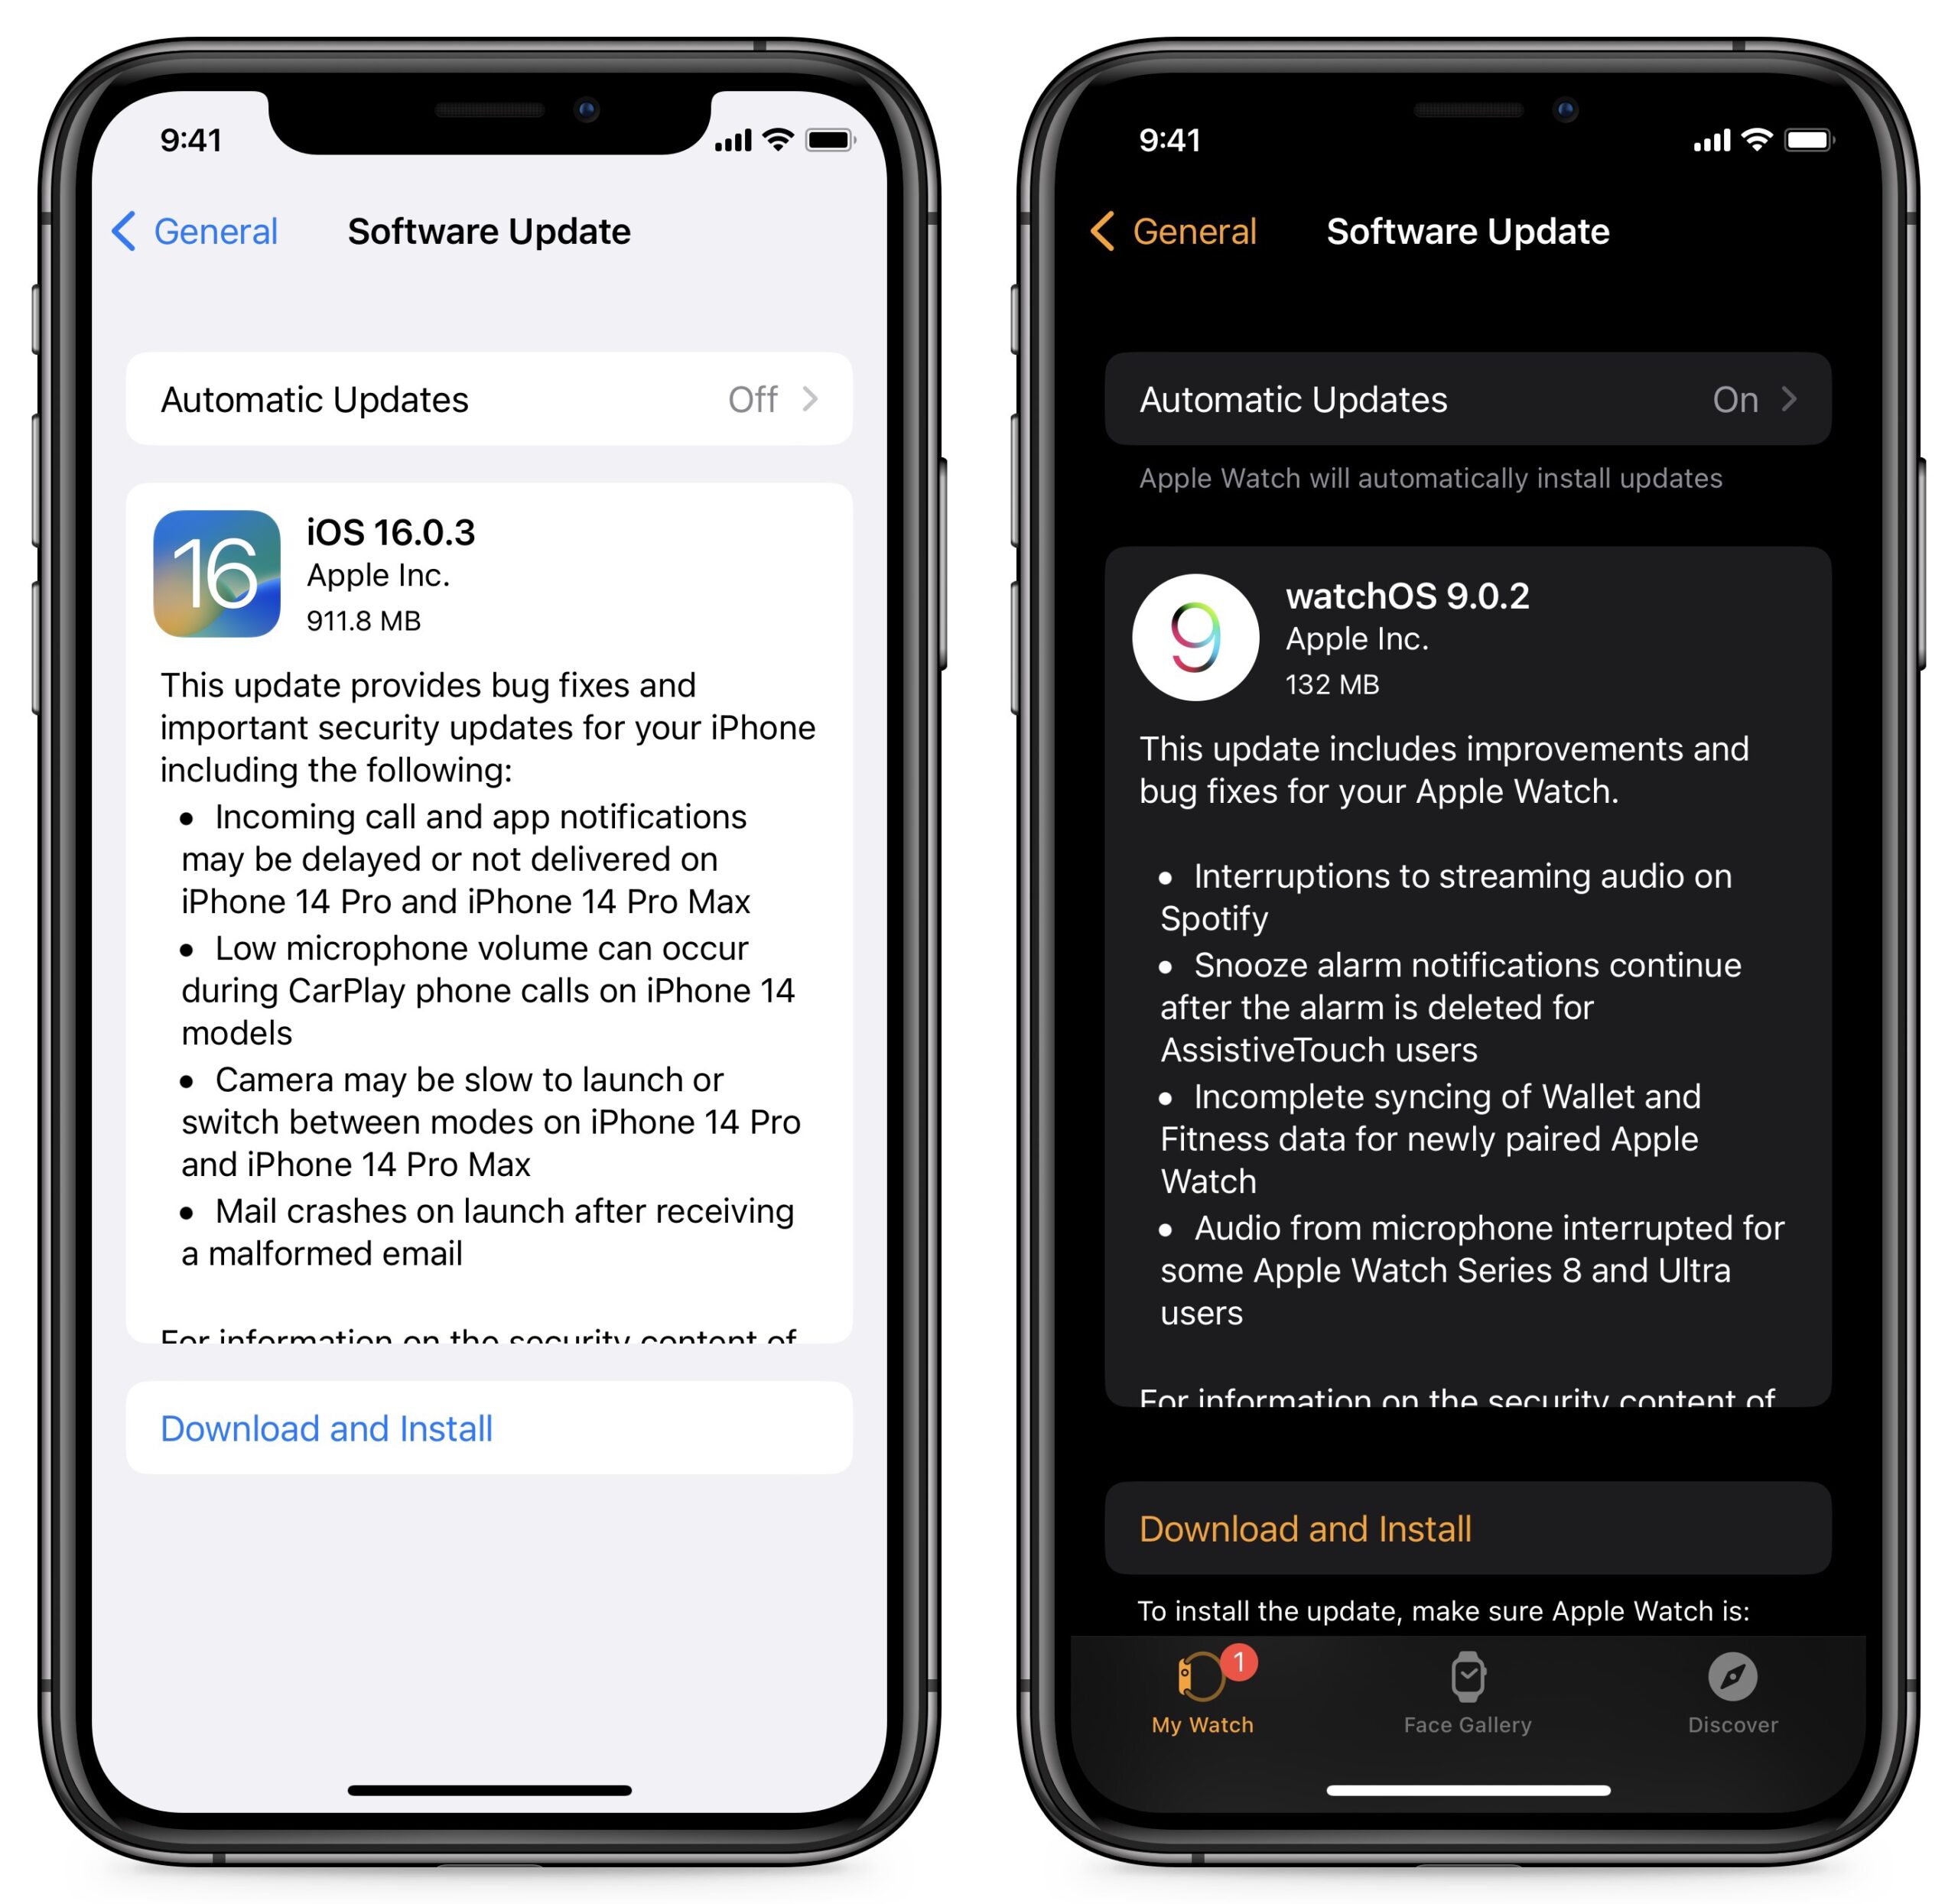 iOS 16.0.3 release notes and watchOS 9.0.2 notes